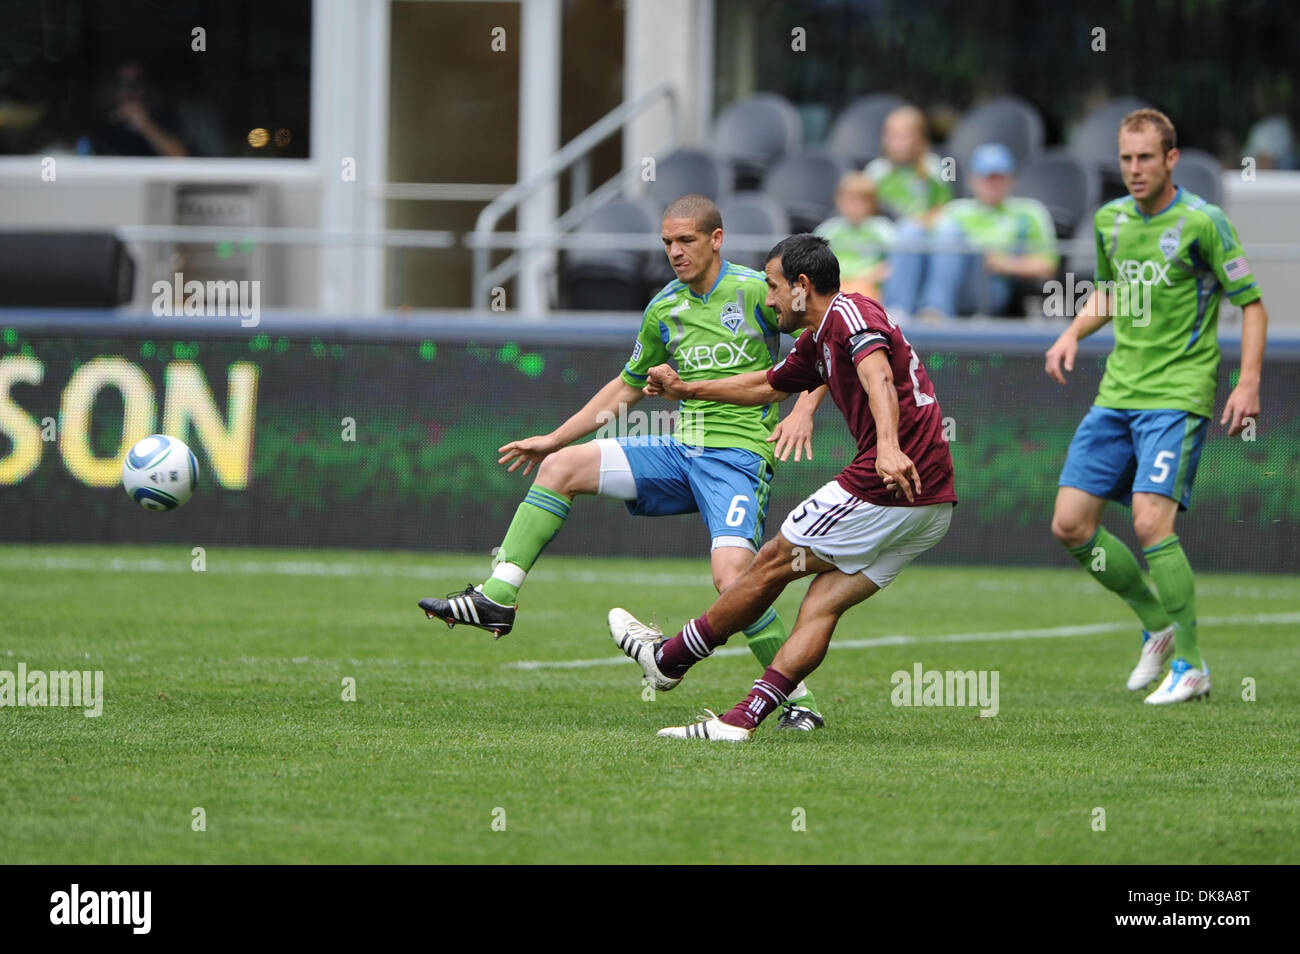 July 16, 2011 - Seattle, Washington, United States of America - Seattle Sounders Midfielder, Osvaldo Alonso (6) attempts to close down a Pablo Mastroeni (25) crossduring the 1st half of the Colorado Rapids vs. Seattle Sounders FC at CenturyLink Field. Colorado leads 2-1 at halftime (Credit Image: © Chris Coulter/Southcreek Global/ZUMApress.com) Stock Photo